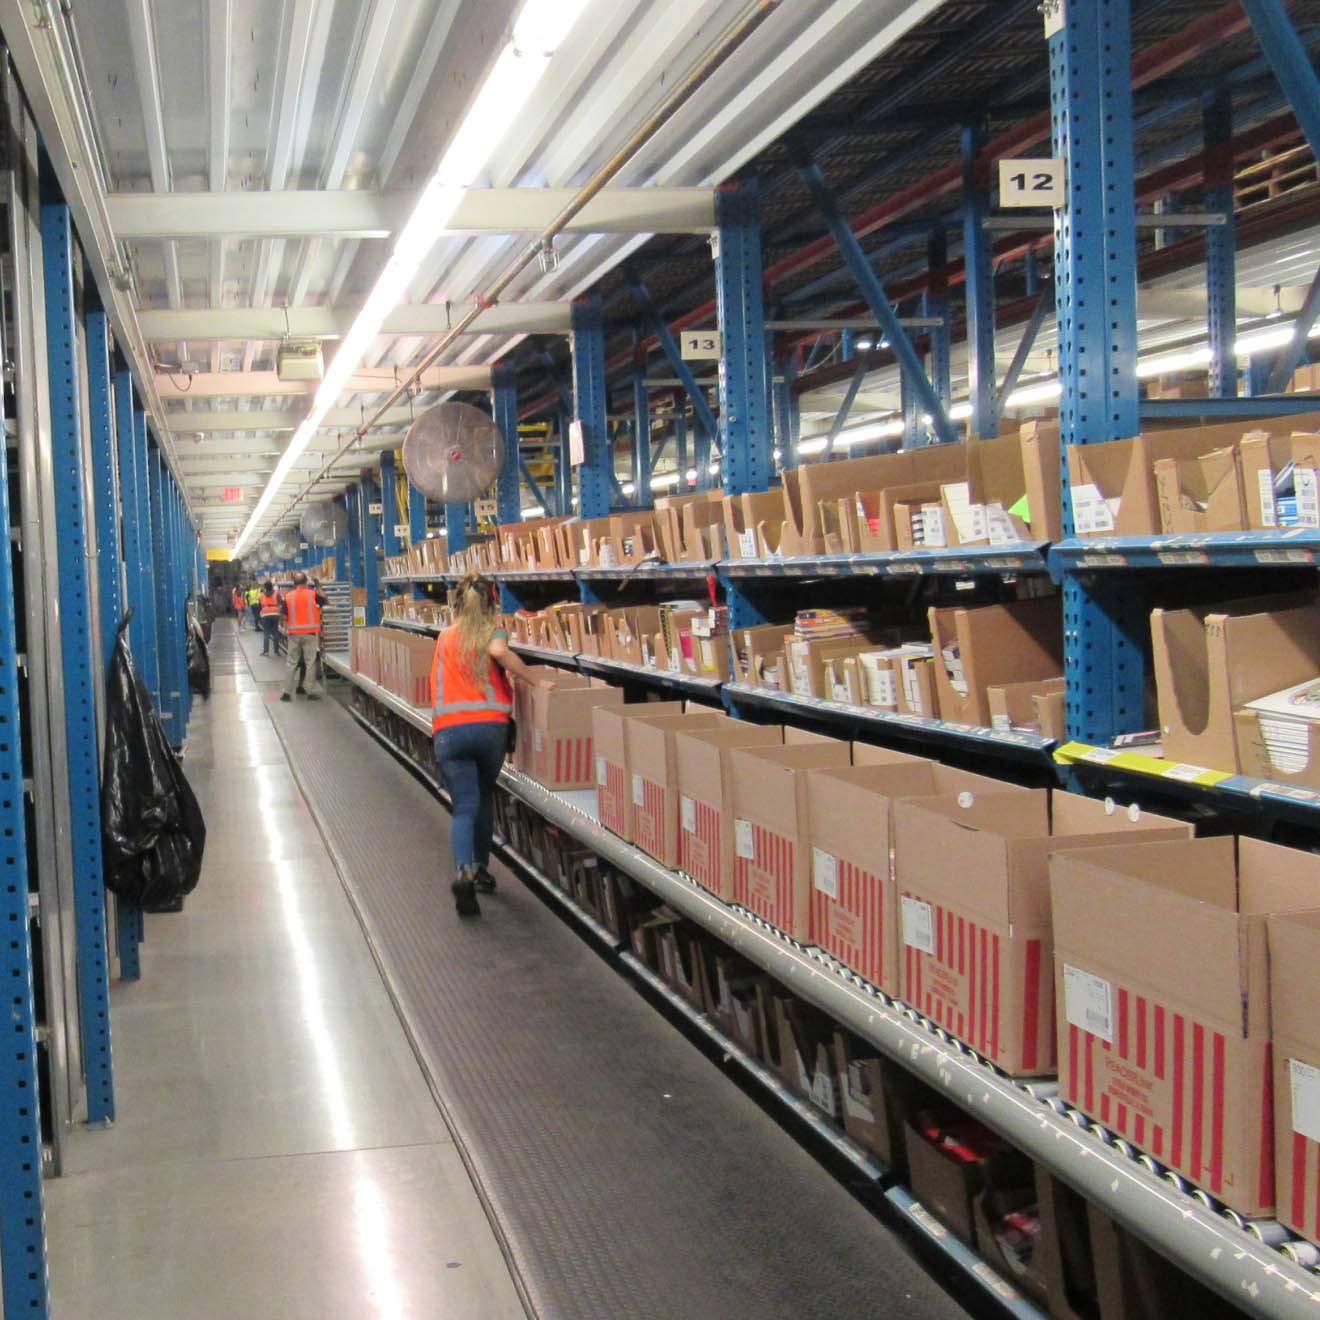 ReaderLink employees packing orders at the warehouse